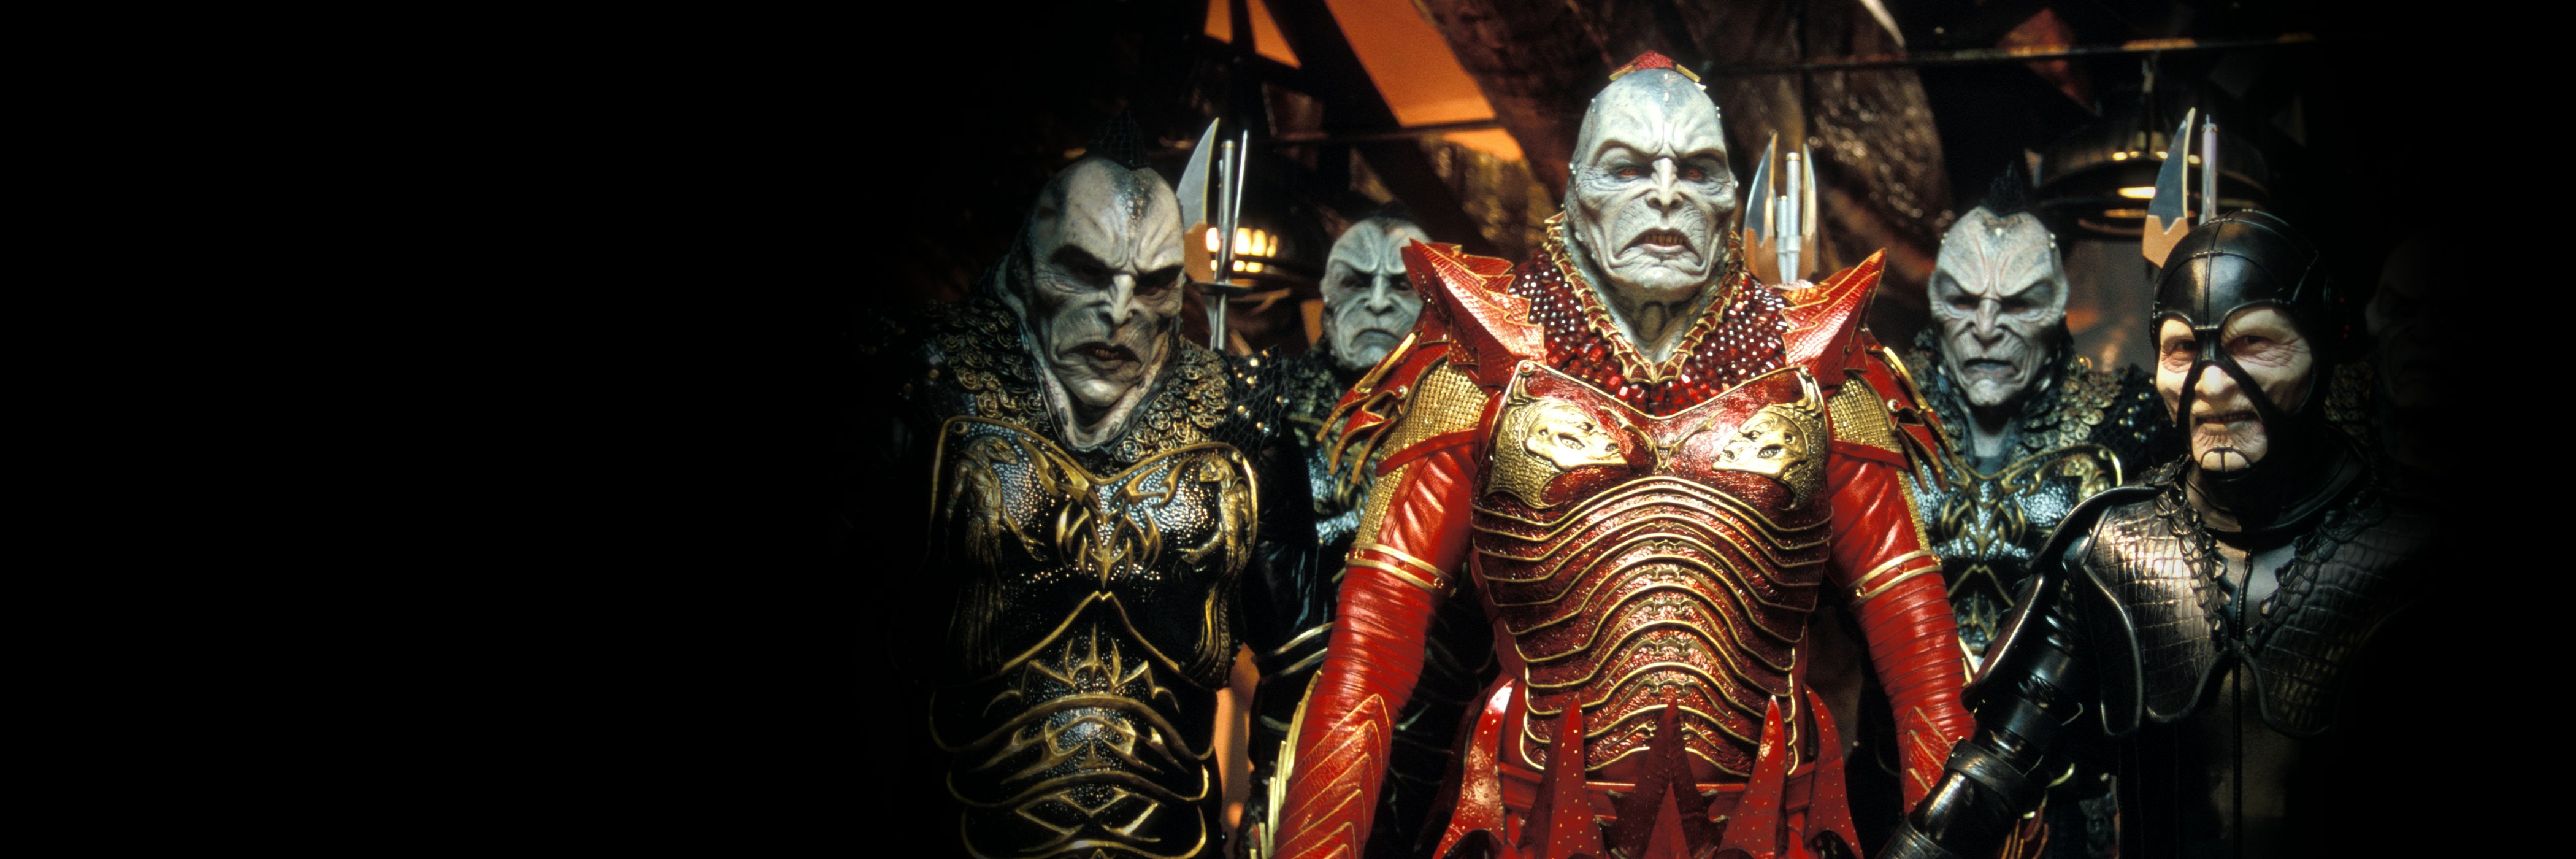 What is your favorite Farscape alien or creature design? Mine are the  Scarrans, amazing looking makeup, design, and outfits! : r/farscape